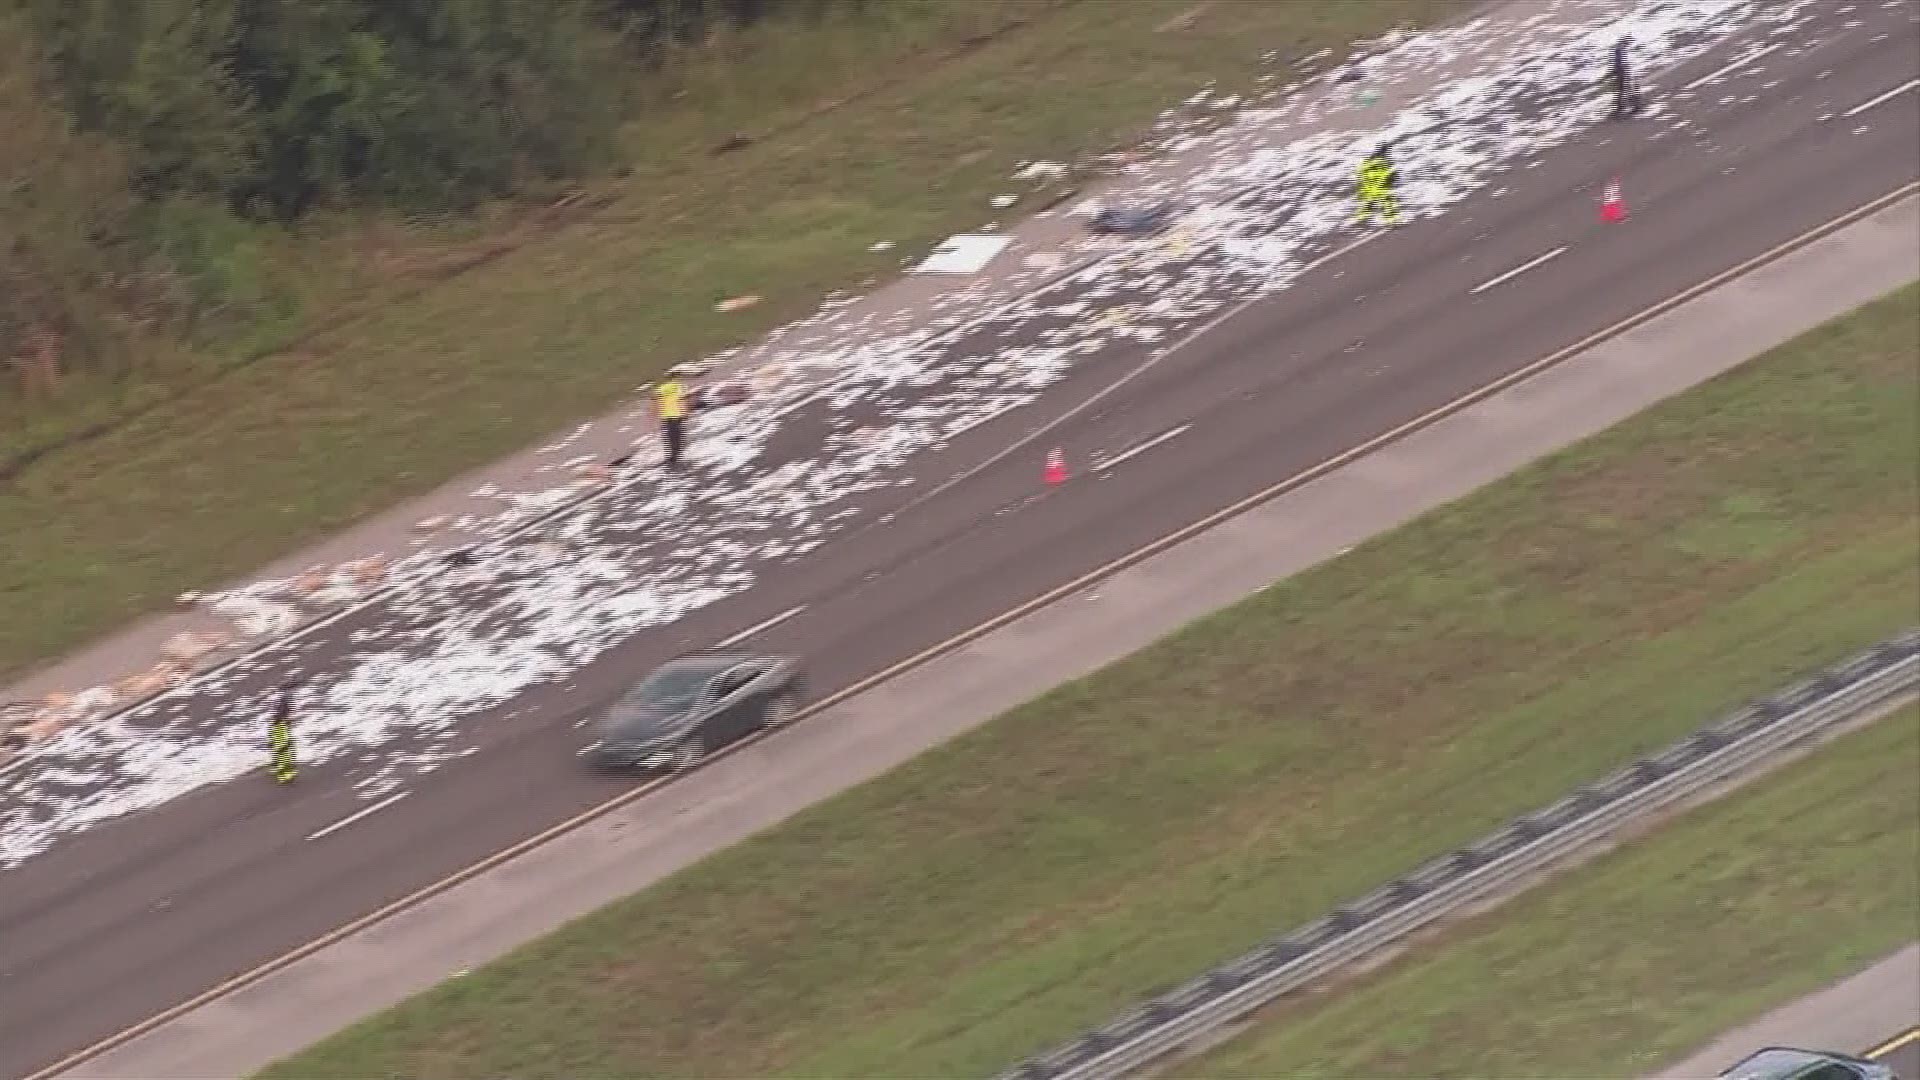 Debris scatters a portion of I-75 after an accident Monday morning near Big Bend Road.